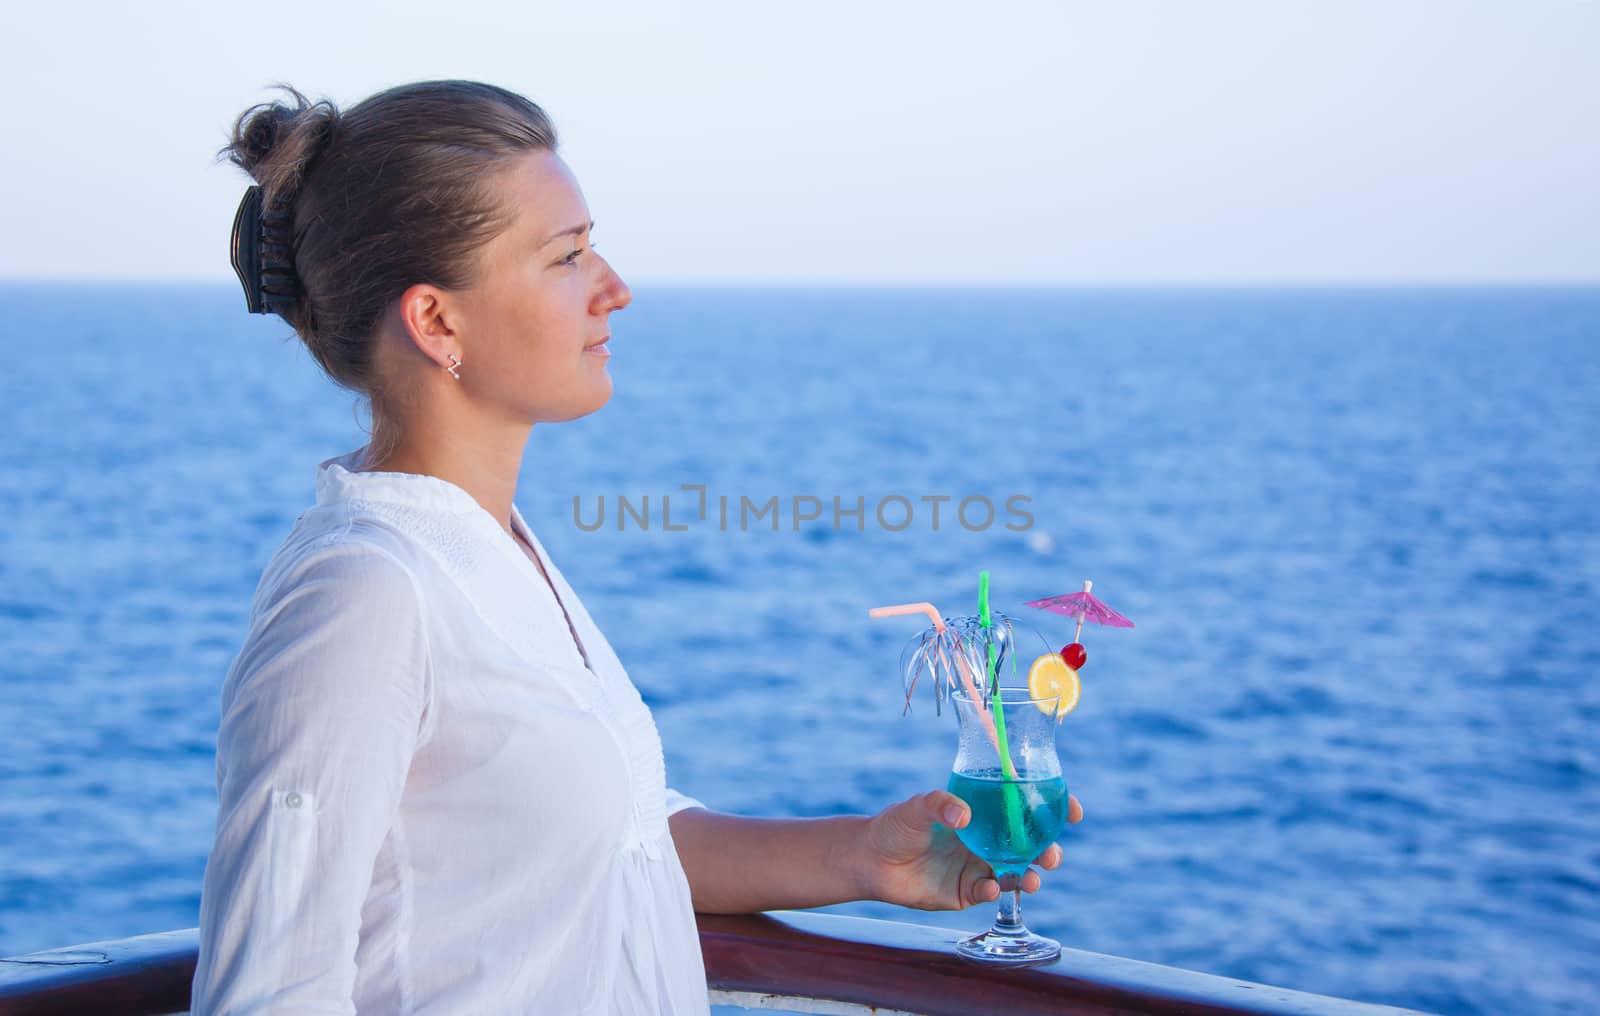 pretty girl drinking a cold drink, admiring the sea views by MegaArt